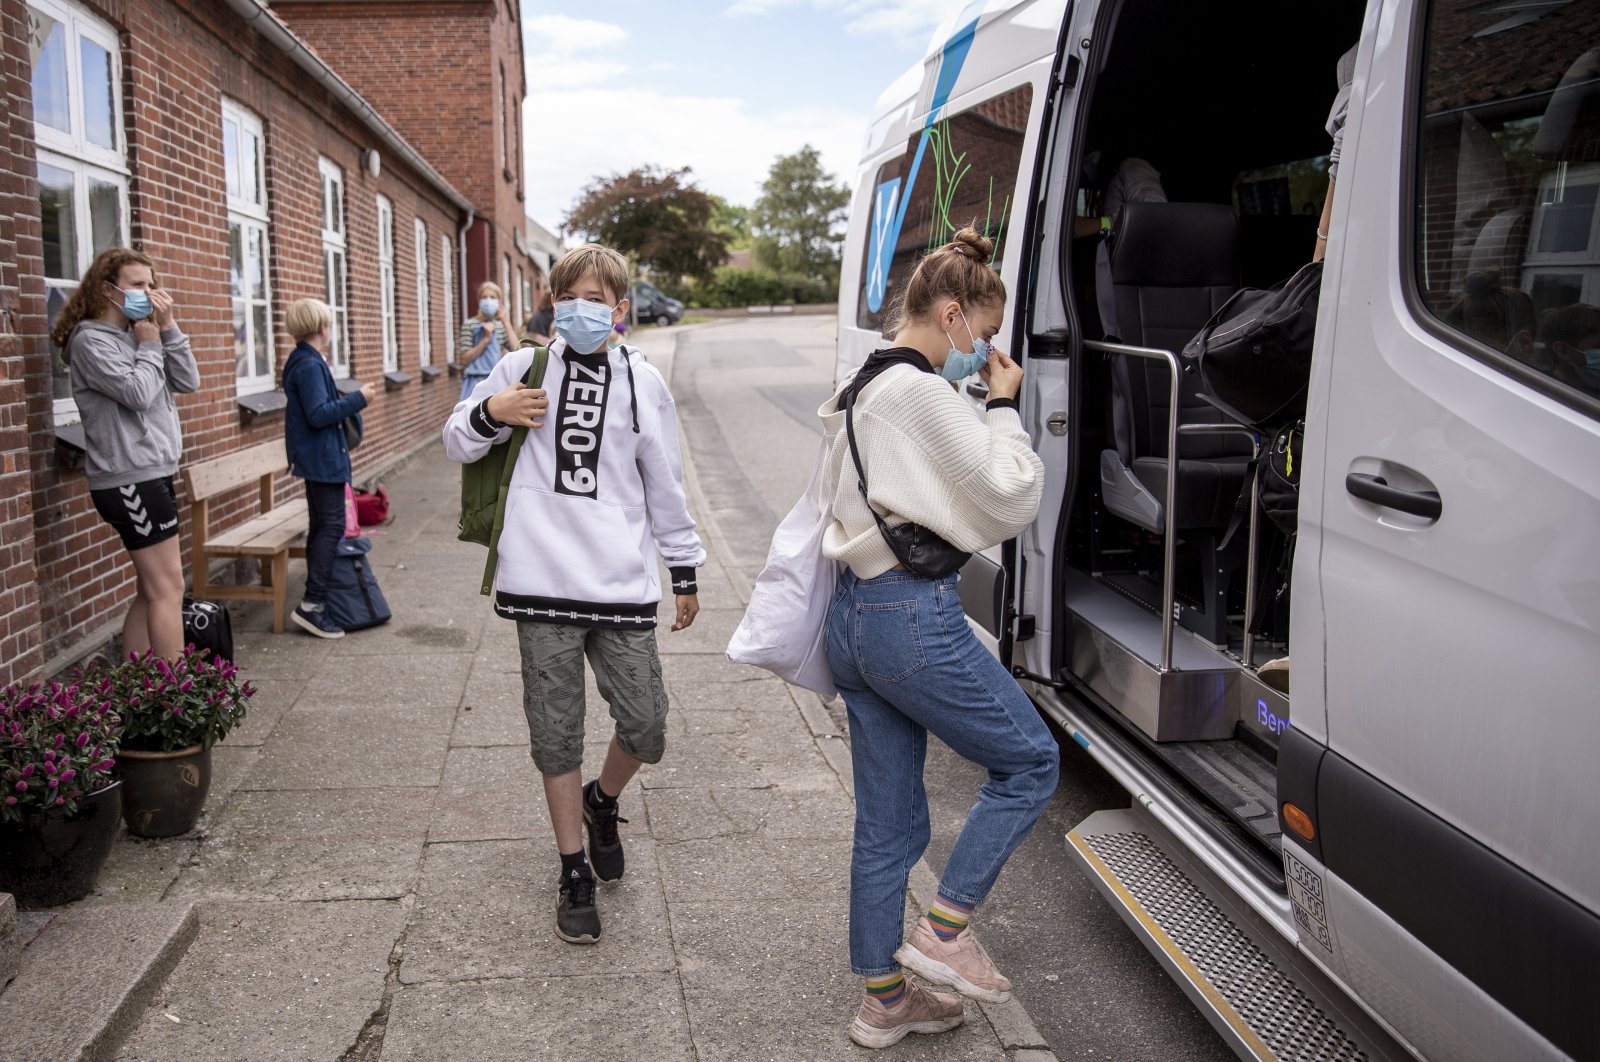 Students board the school bus at a schol in Samso, Denmark, Sept. 7, 2020. (Getty Images)